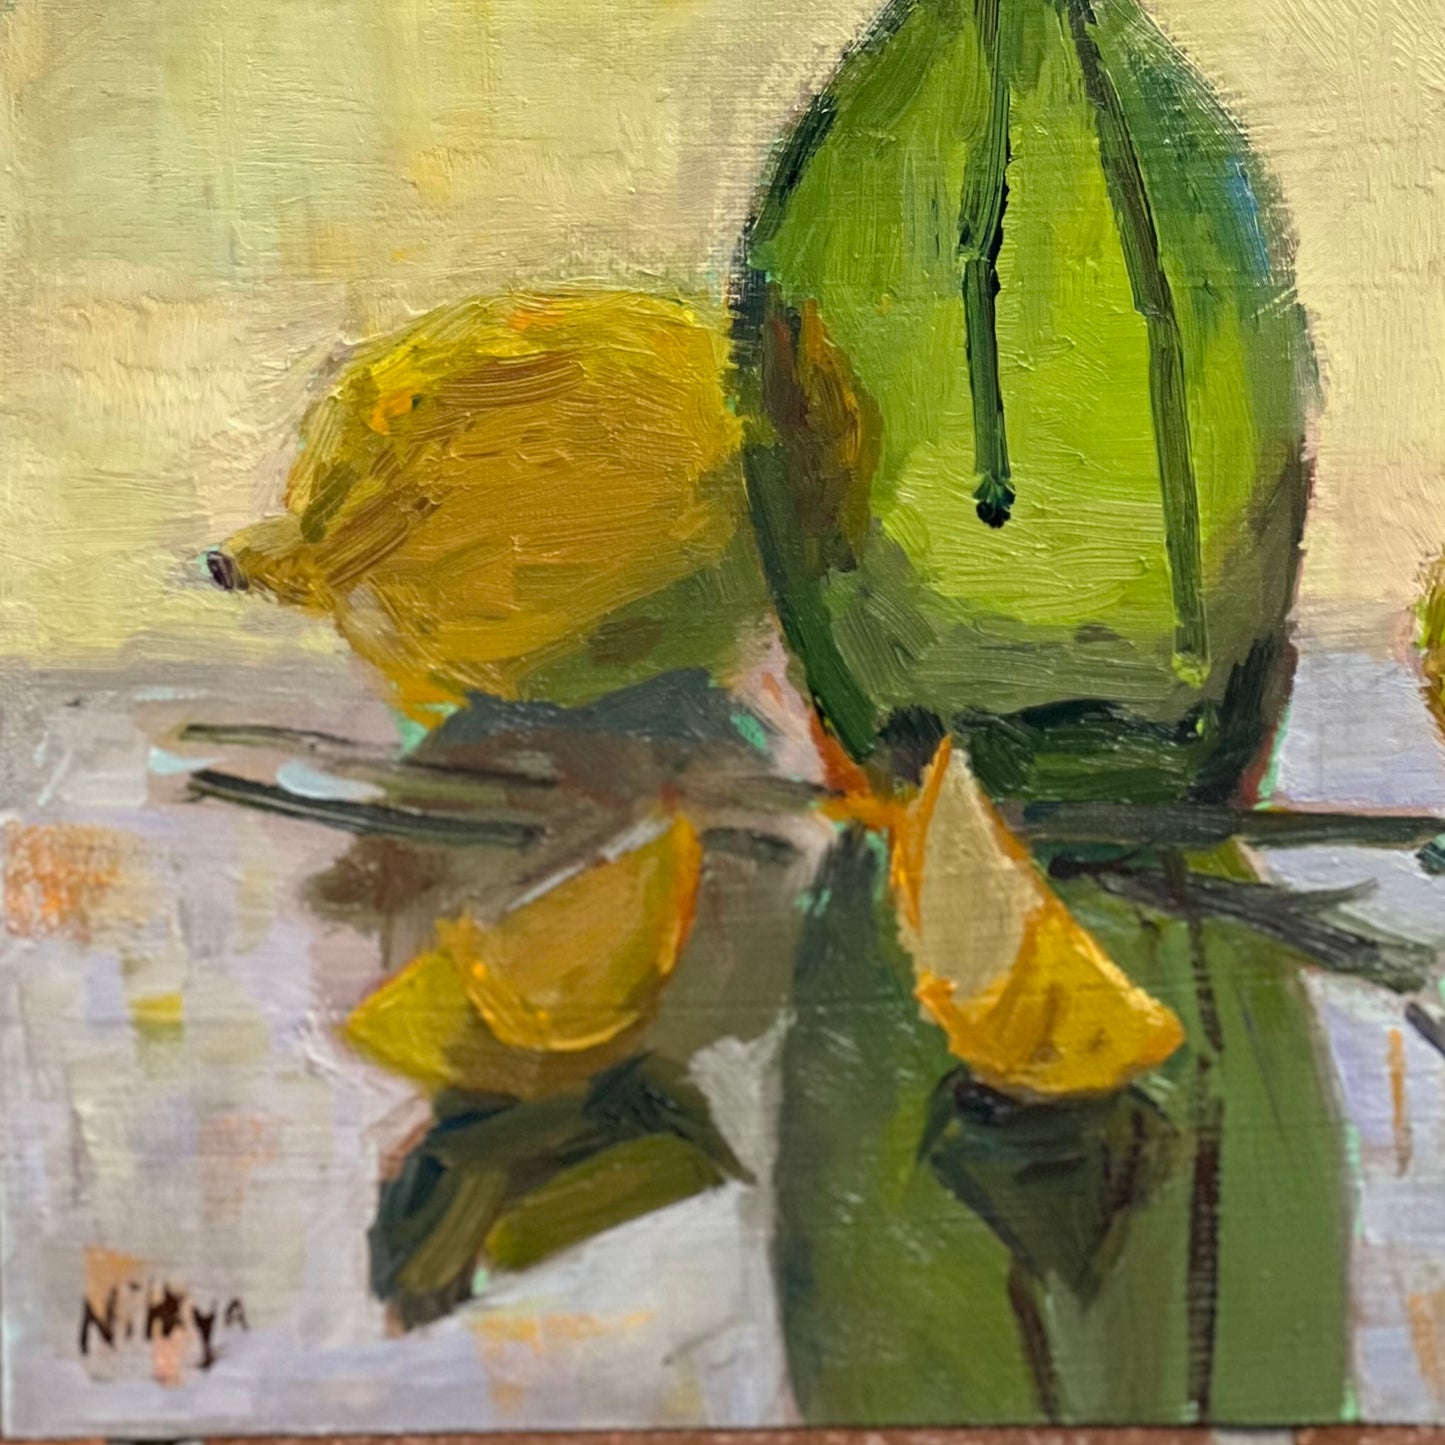 Colored bottles and lemons by the window - still life oil painting